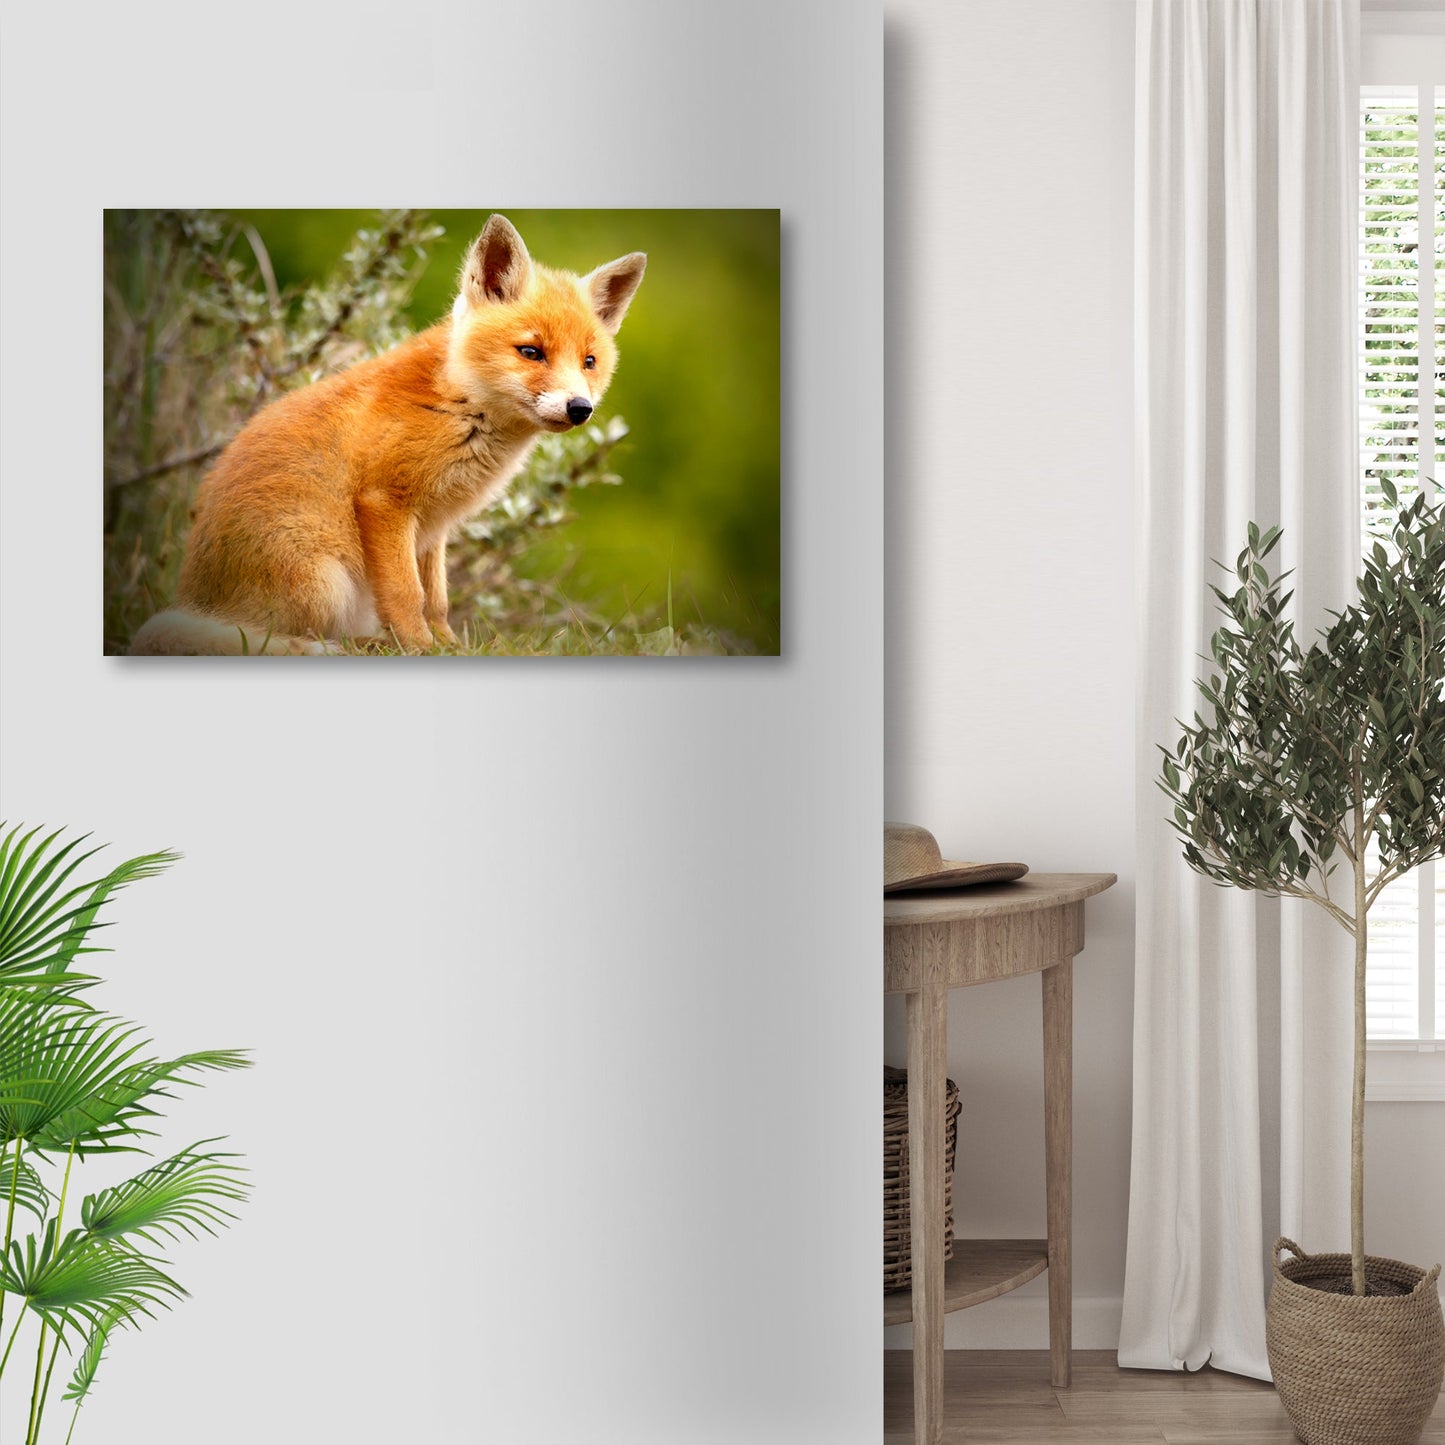 Baby Fox in the Woods  Canvas Wall Decor with Wildlife